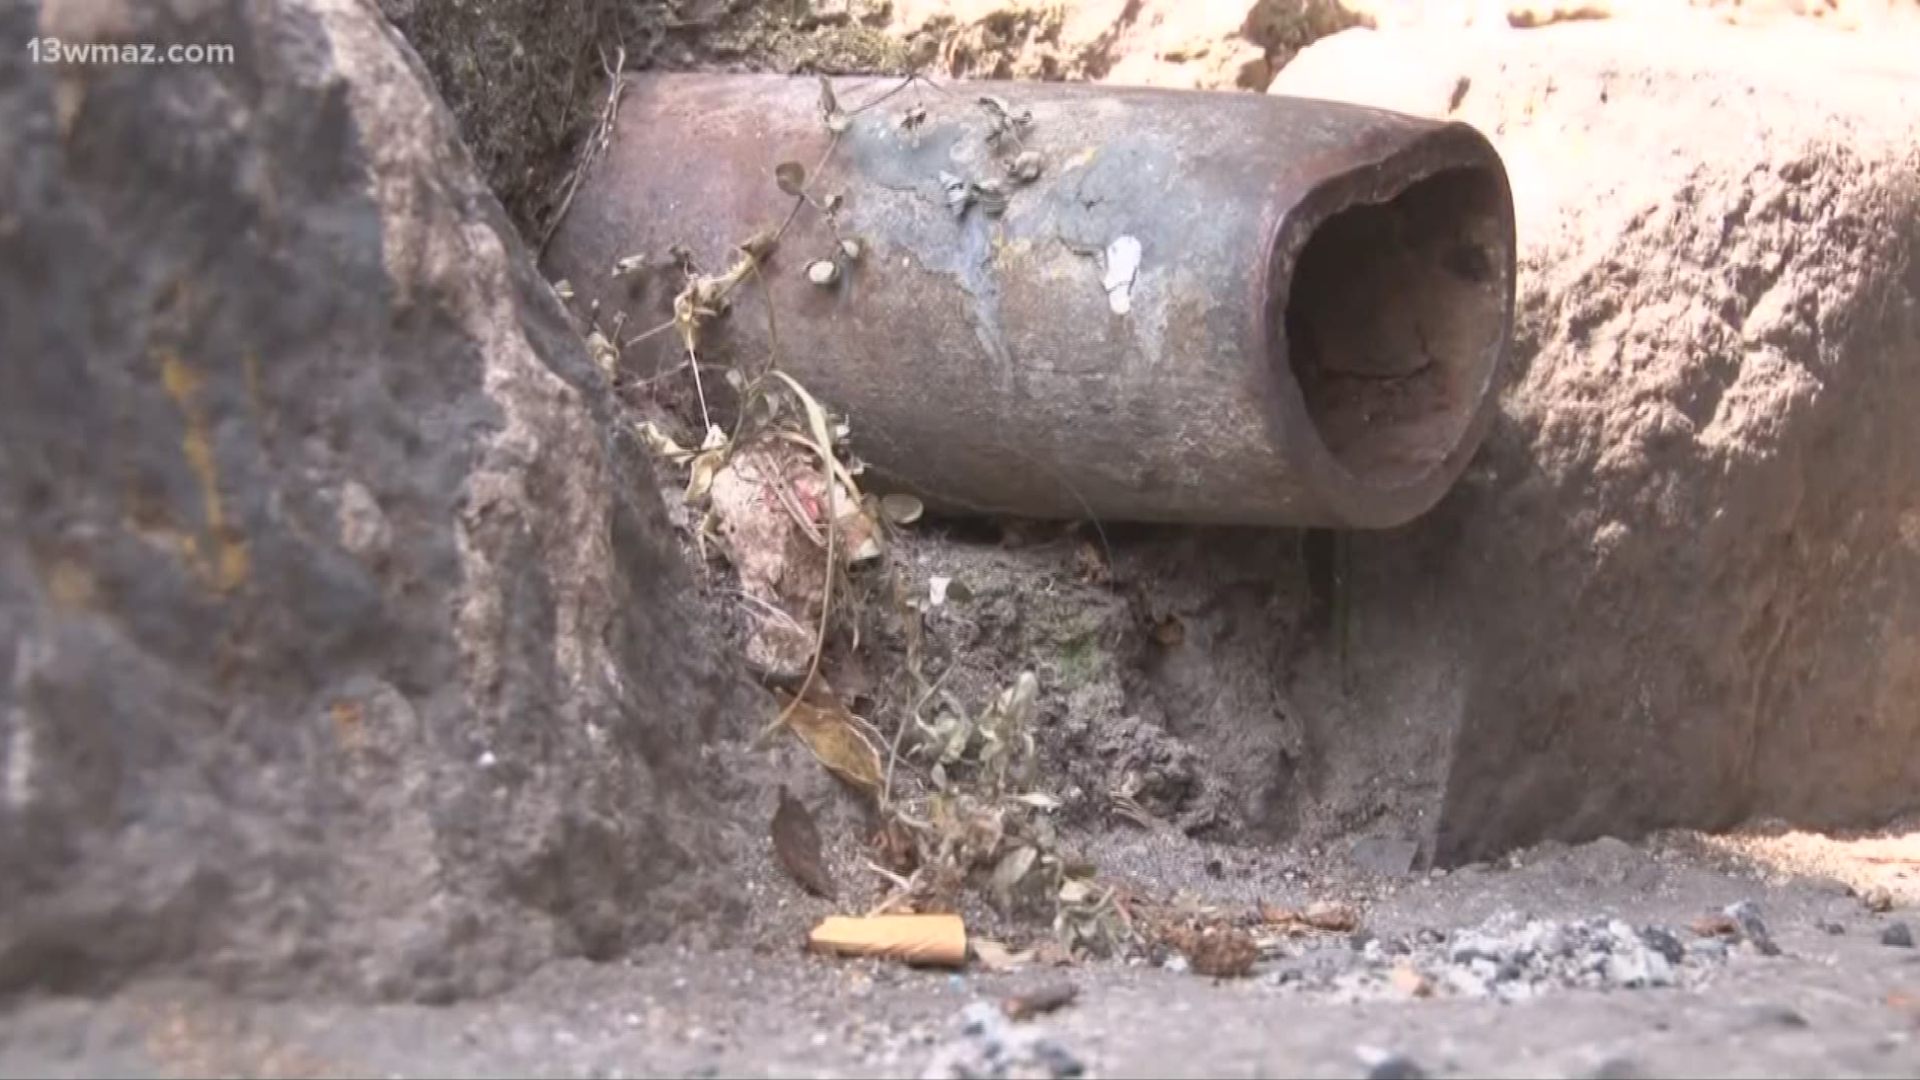 The Macon Water Authority says if they take on a massive project to repair the county's stormwater system, they would pay for it by charging customers an added fee.